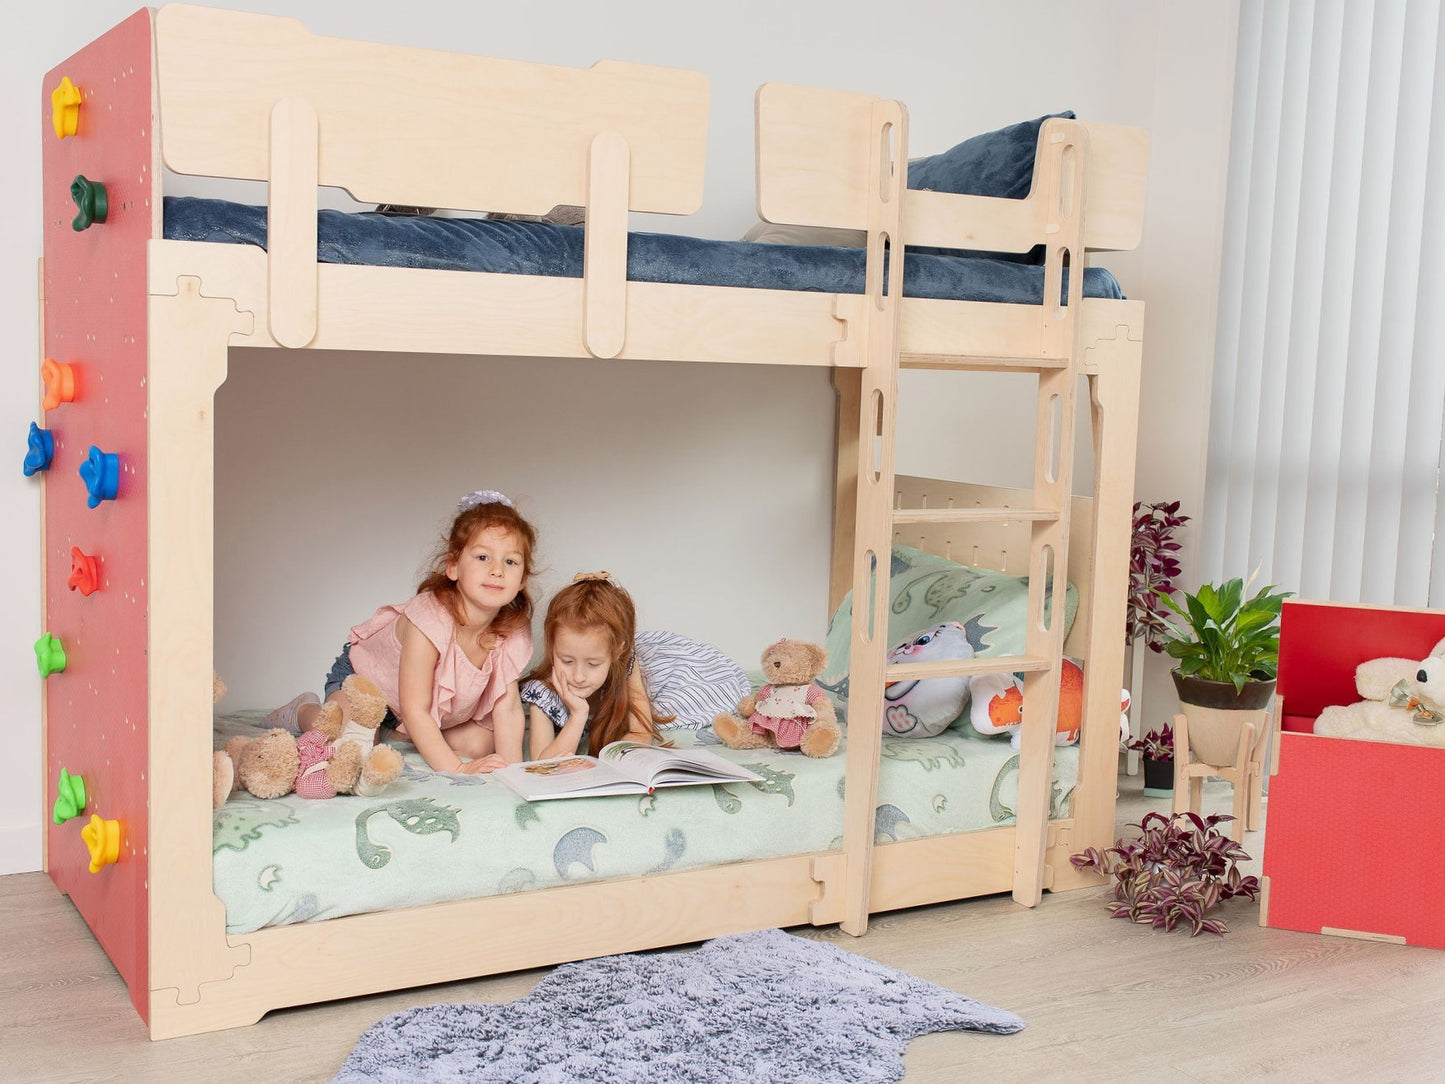 Space challenge? Meet the 3-in-1 Flippable Transformer Bunk Bed: Shift from low to standard to bunk effortlessly.